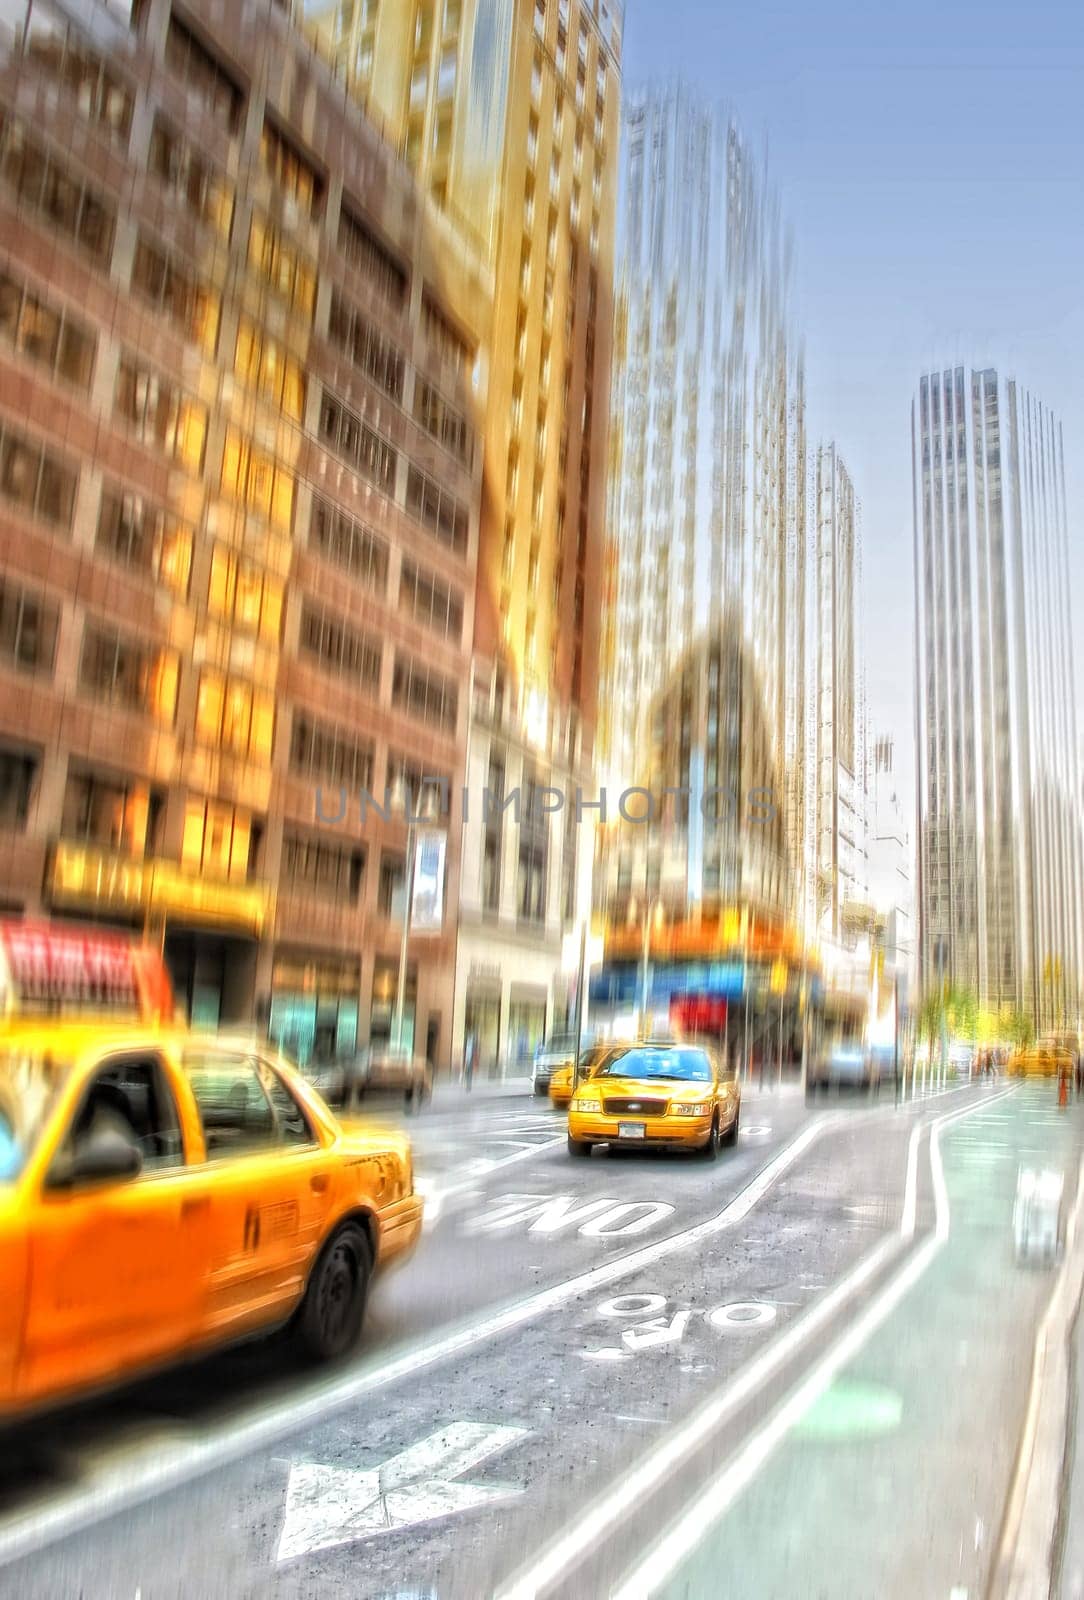 Street, city and blur of taxi, traffic and urban buildings outdoor in New York cityscape. Motion, town and road with car transport, architecture or infrastructure on landscape background in USA.